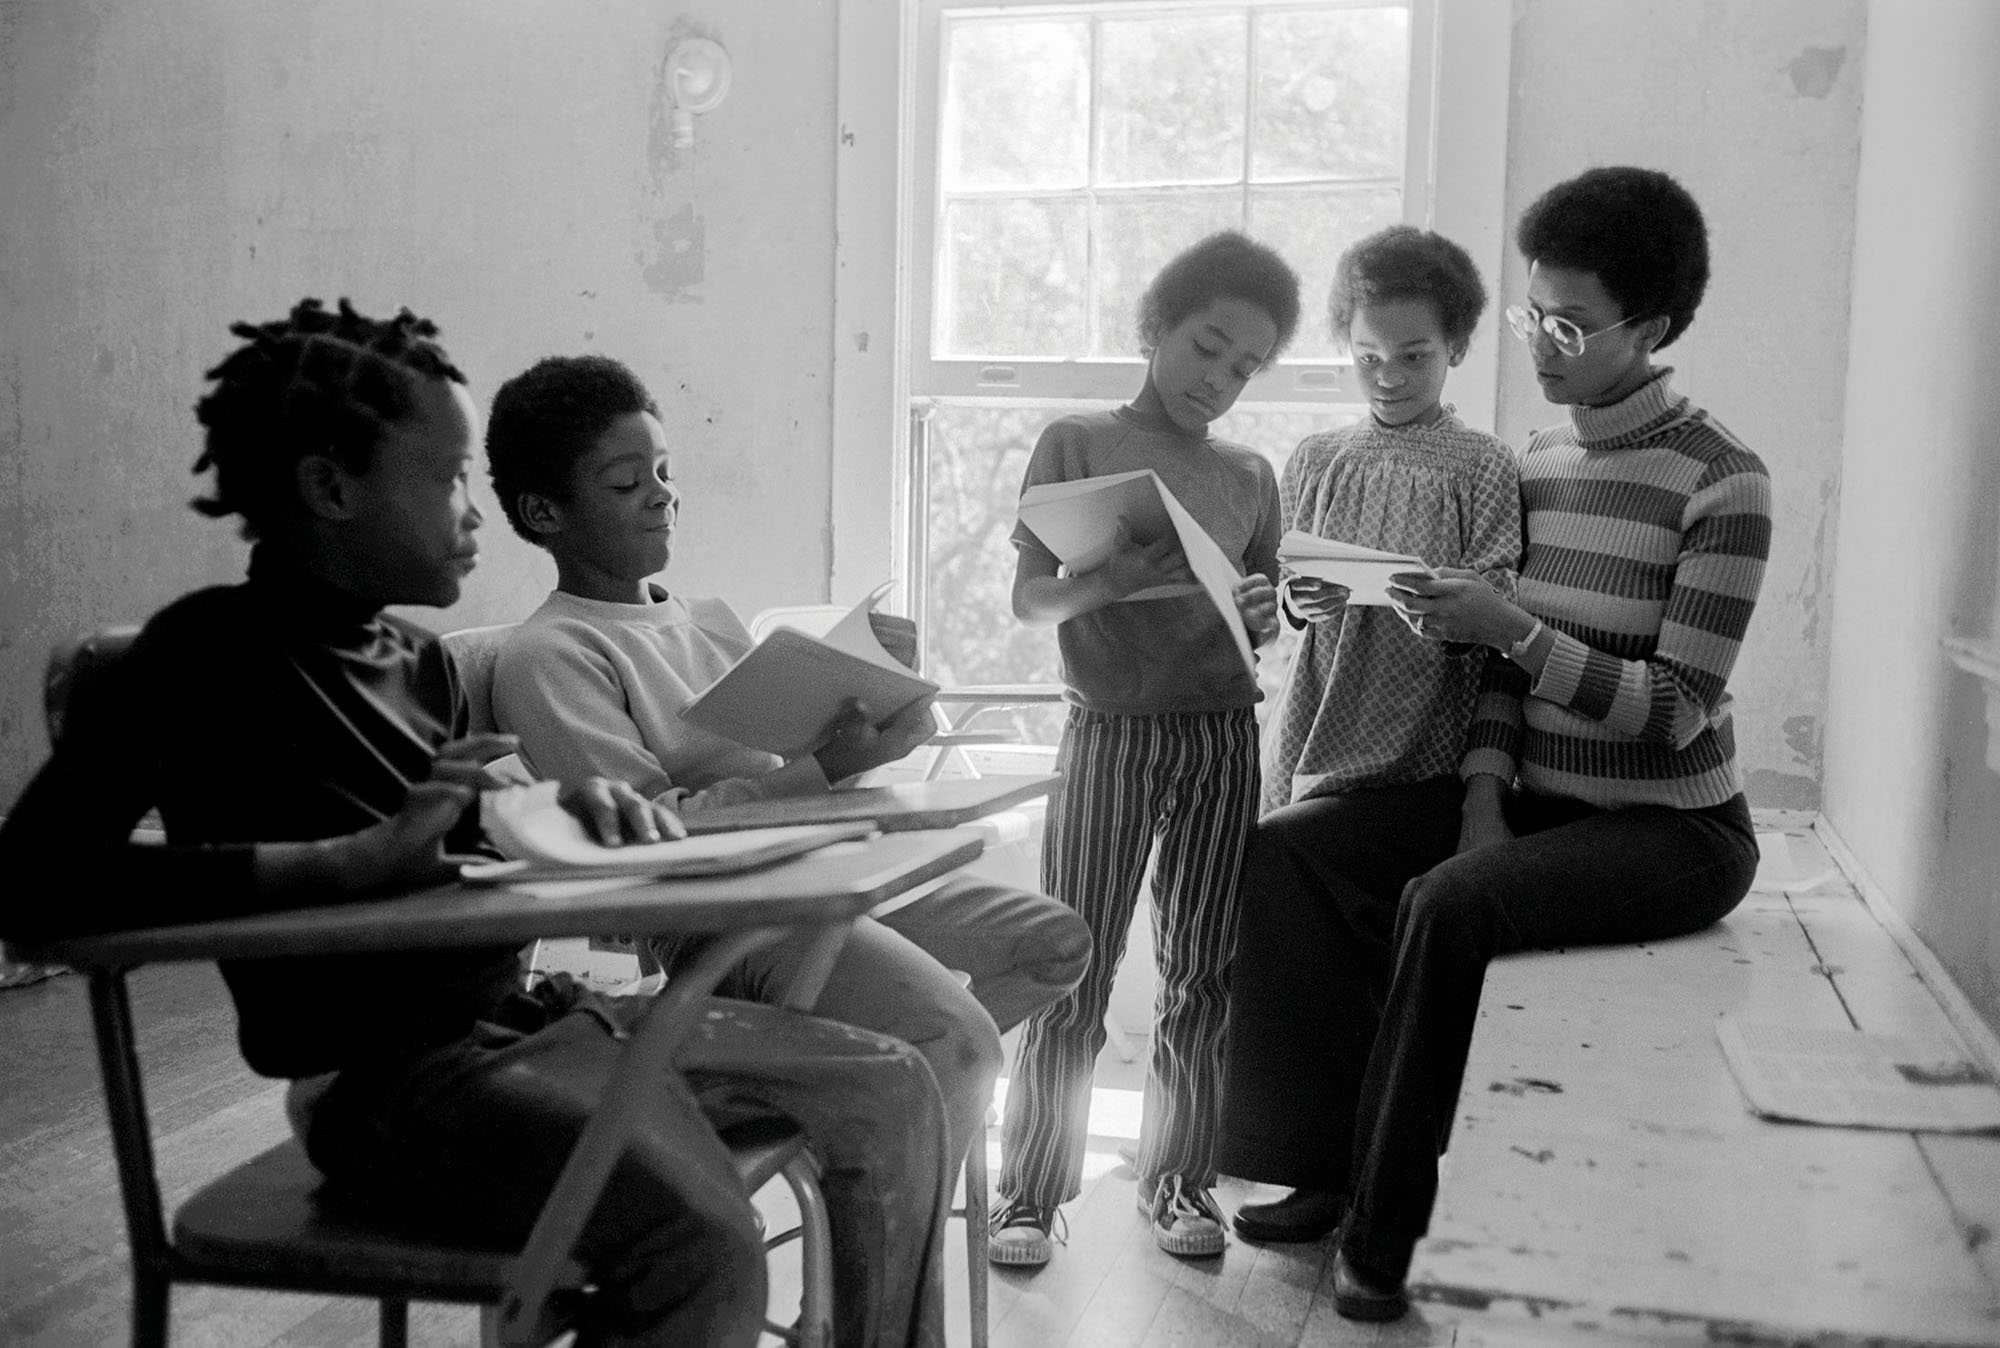 1972 - Oakland, California: Black Panther children in a classroom with their teacher, Evon Carter, widow of Alprentice "Bunchy" Carter, at the Intercommunal Youth Institute, the Black Panther school.